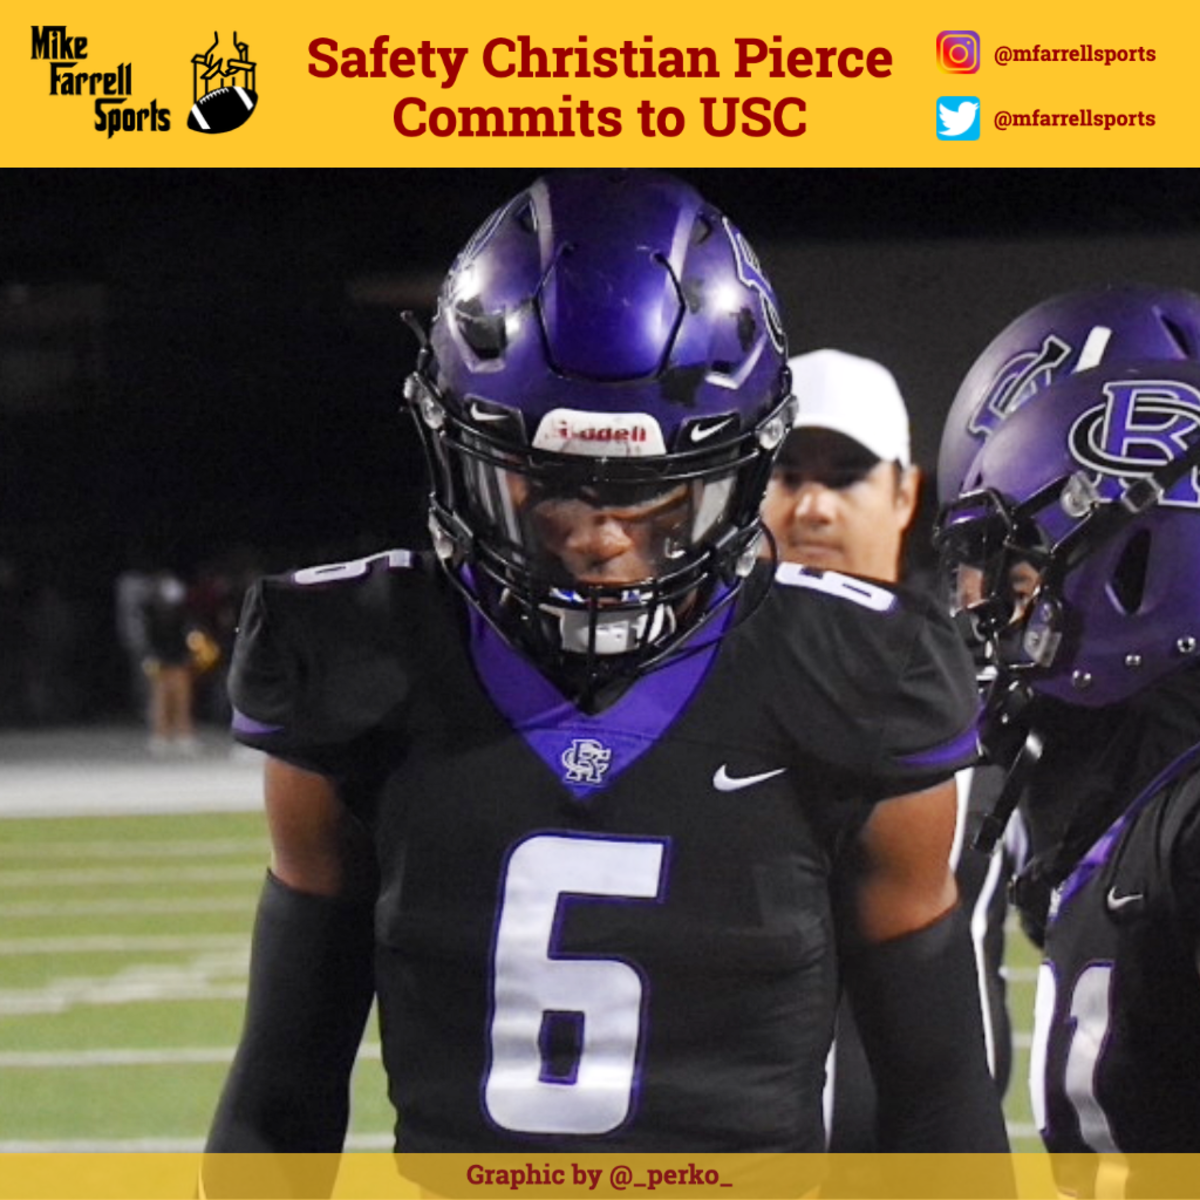 Safety Christian Pierce Commits to USC